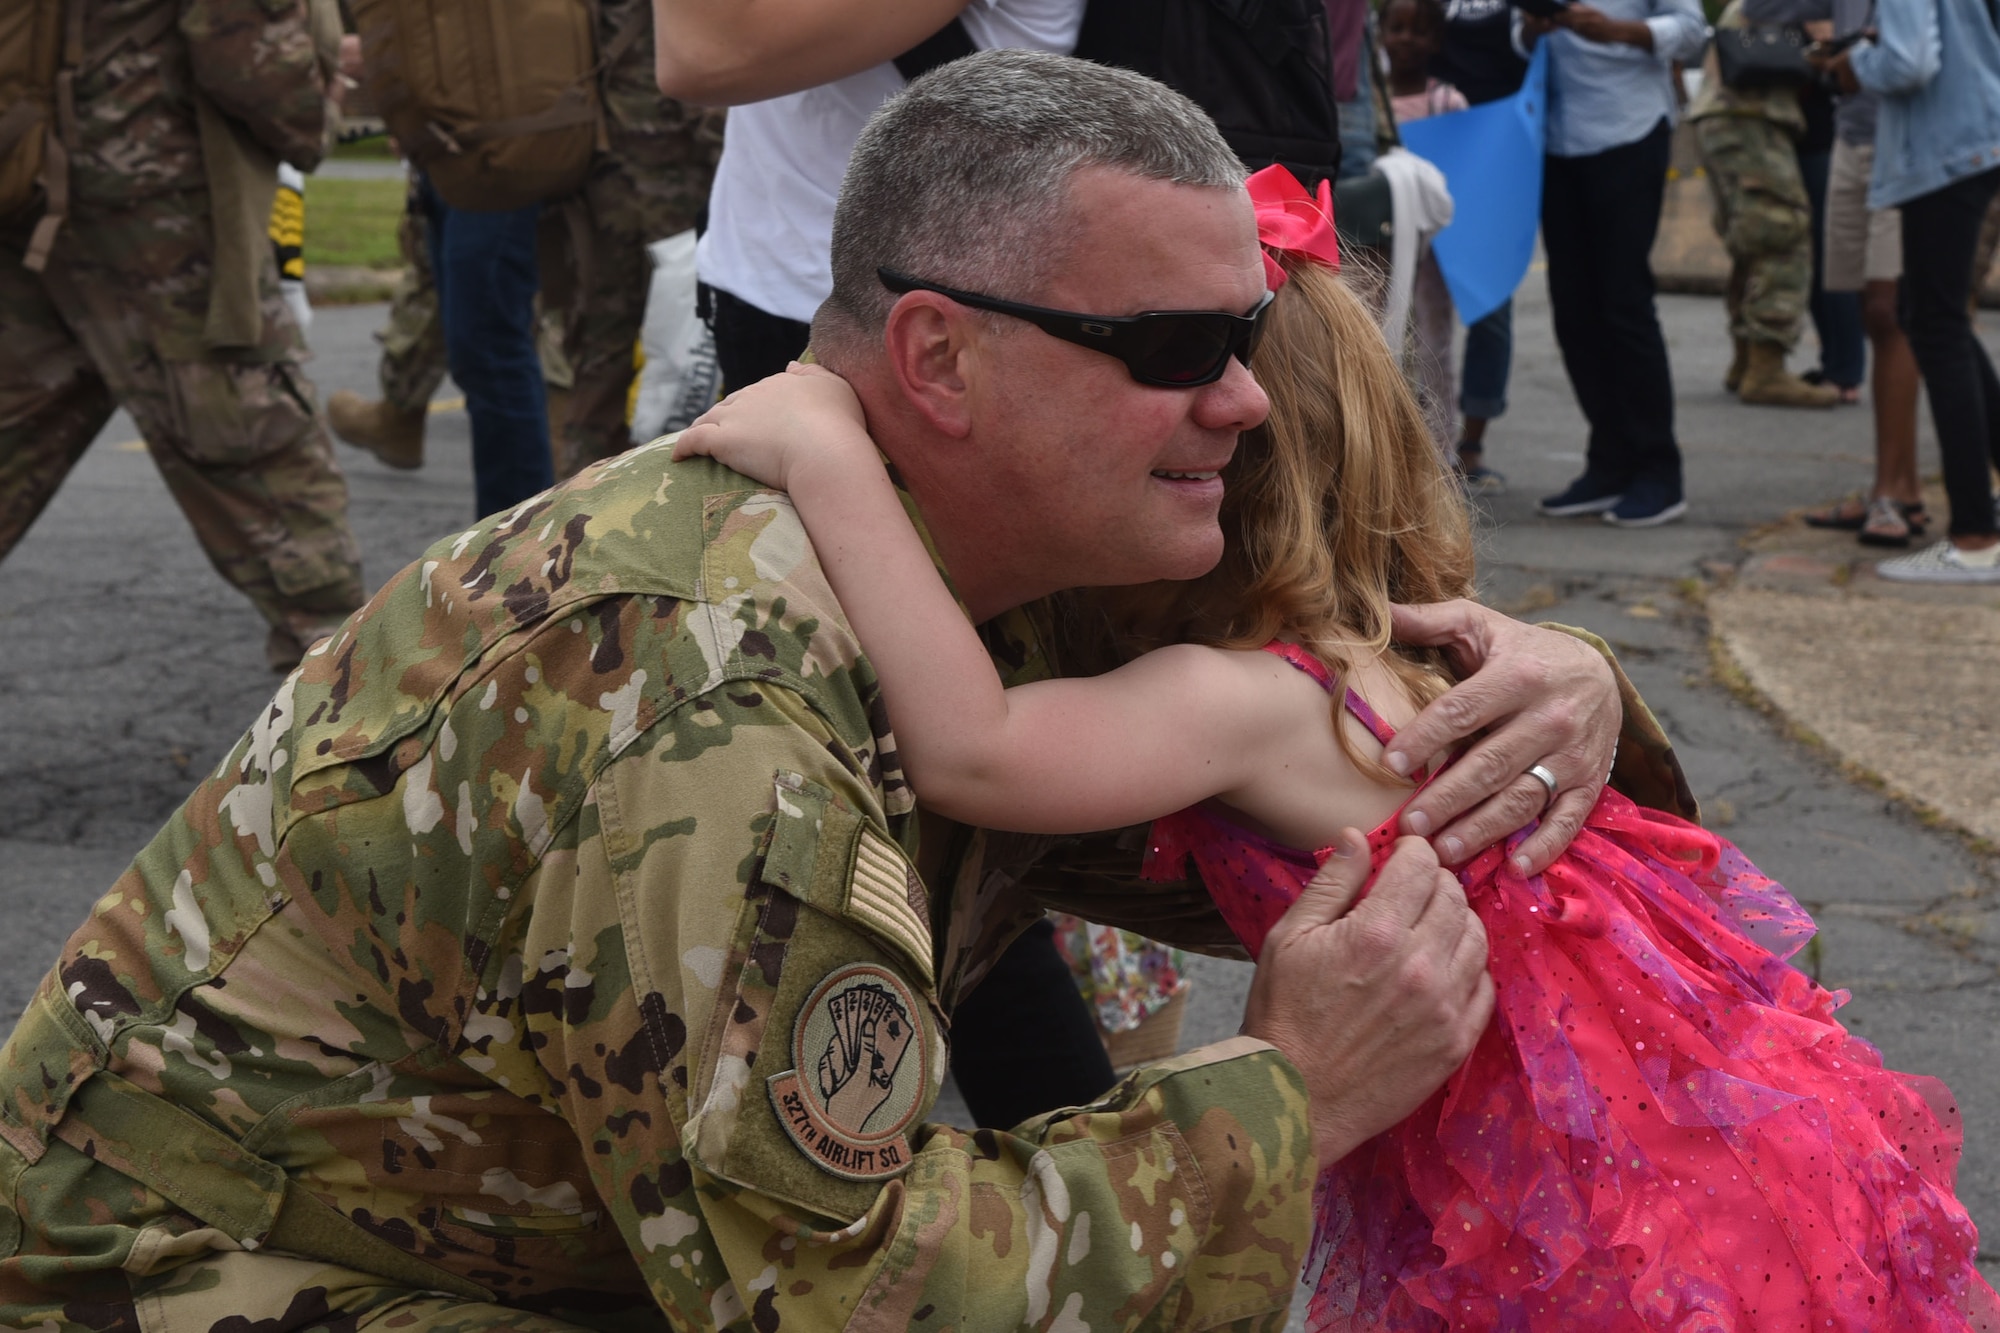 U.S. Air Force Reserve Lt. Col. Chris Dickens, 327th Airlift Squadron chief pilot, hugs his daughter after returning from deployment at Little Rock Air Force Base, Arkansas, May 19, 2019.